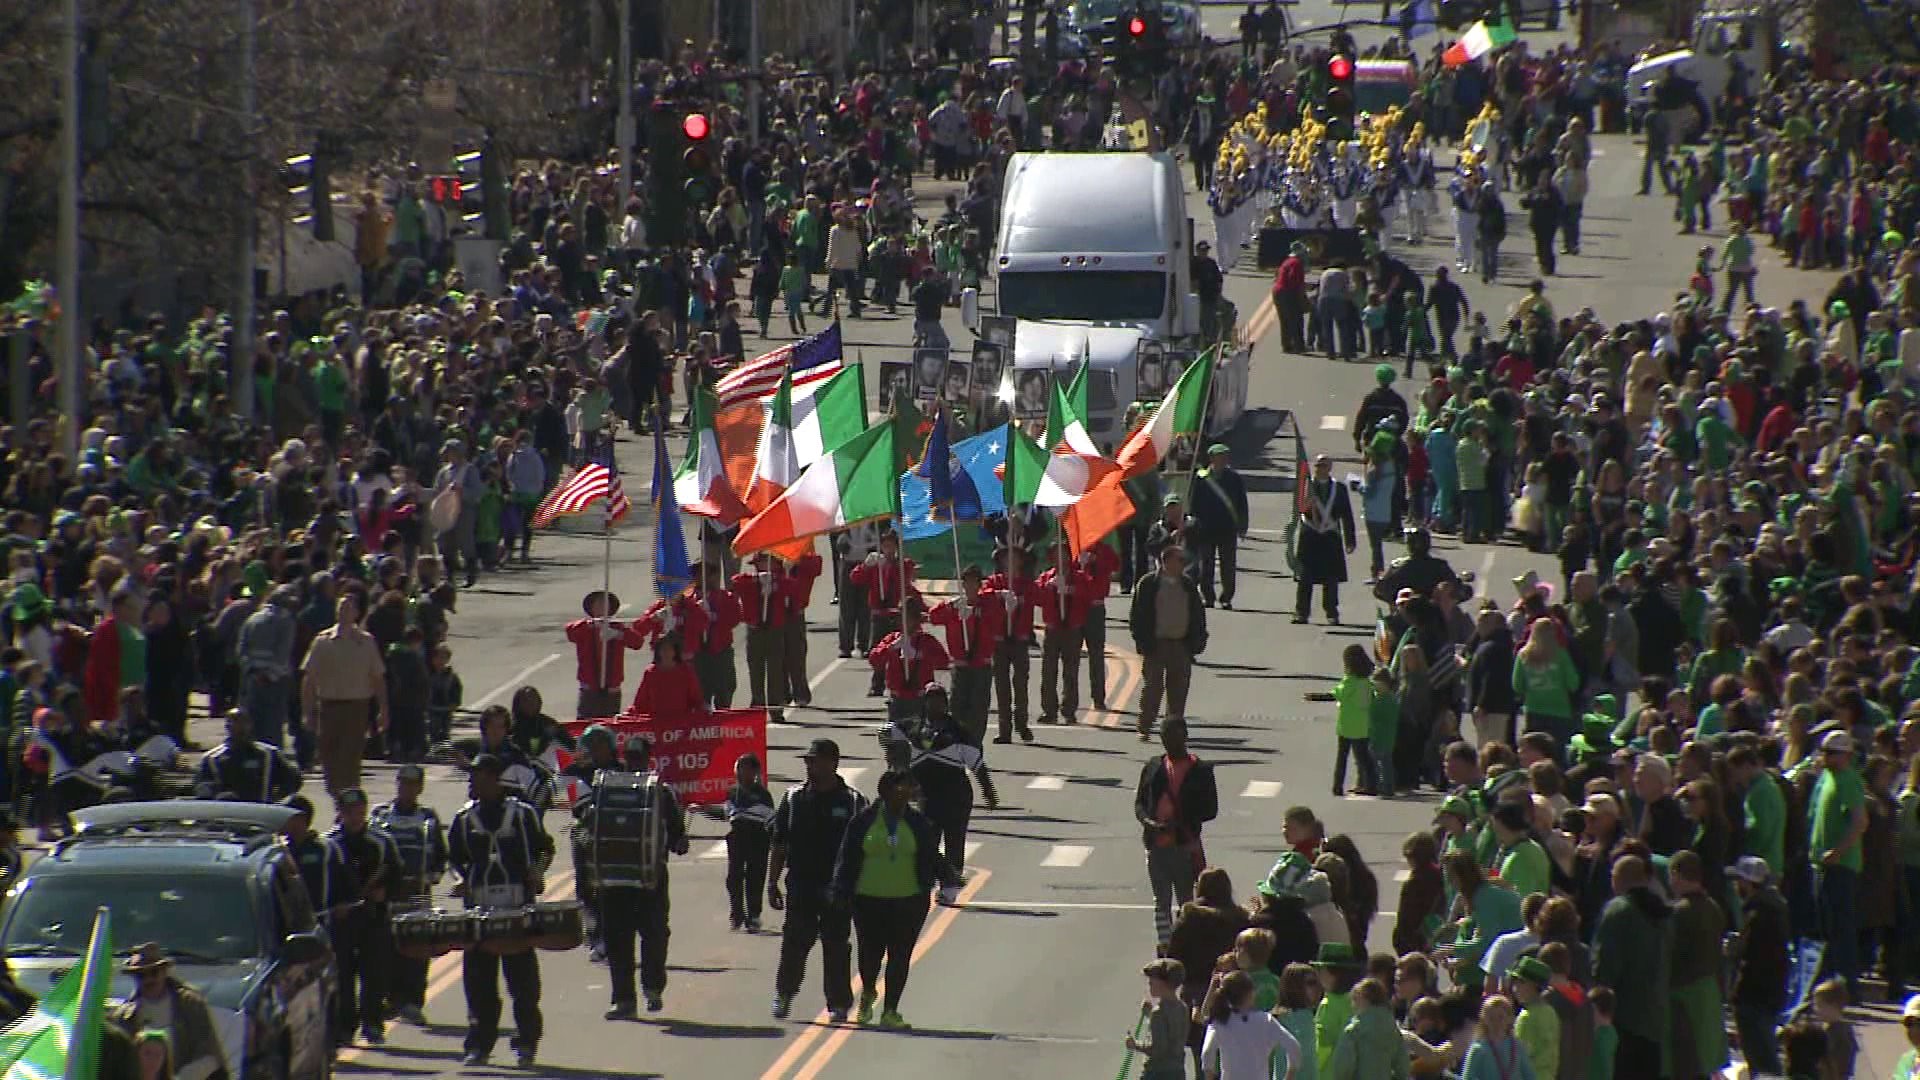 Saint Pat`s Parade marches on in Hartford